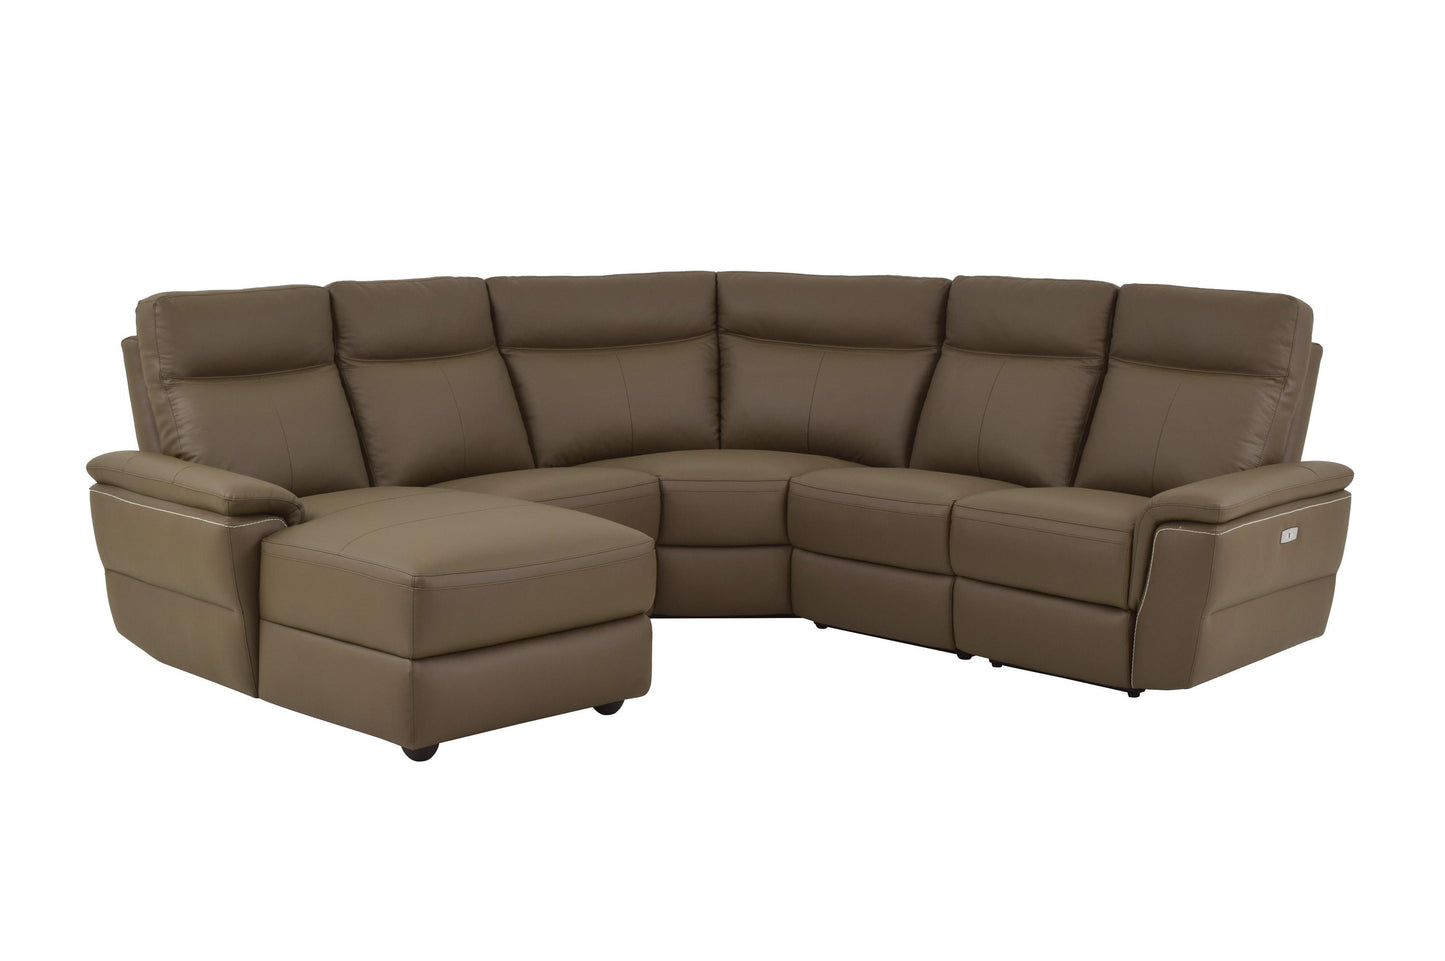 Homelegance Olympia 5PC Power Sectional Left Chaise, 2 Chair, Corner & Right Recliner Chair in Brown Taupe Top Grain Leather